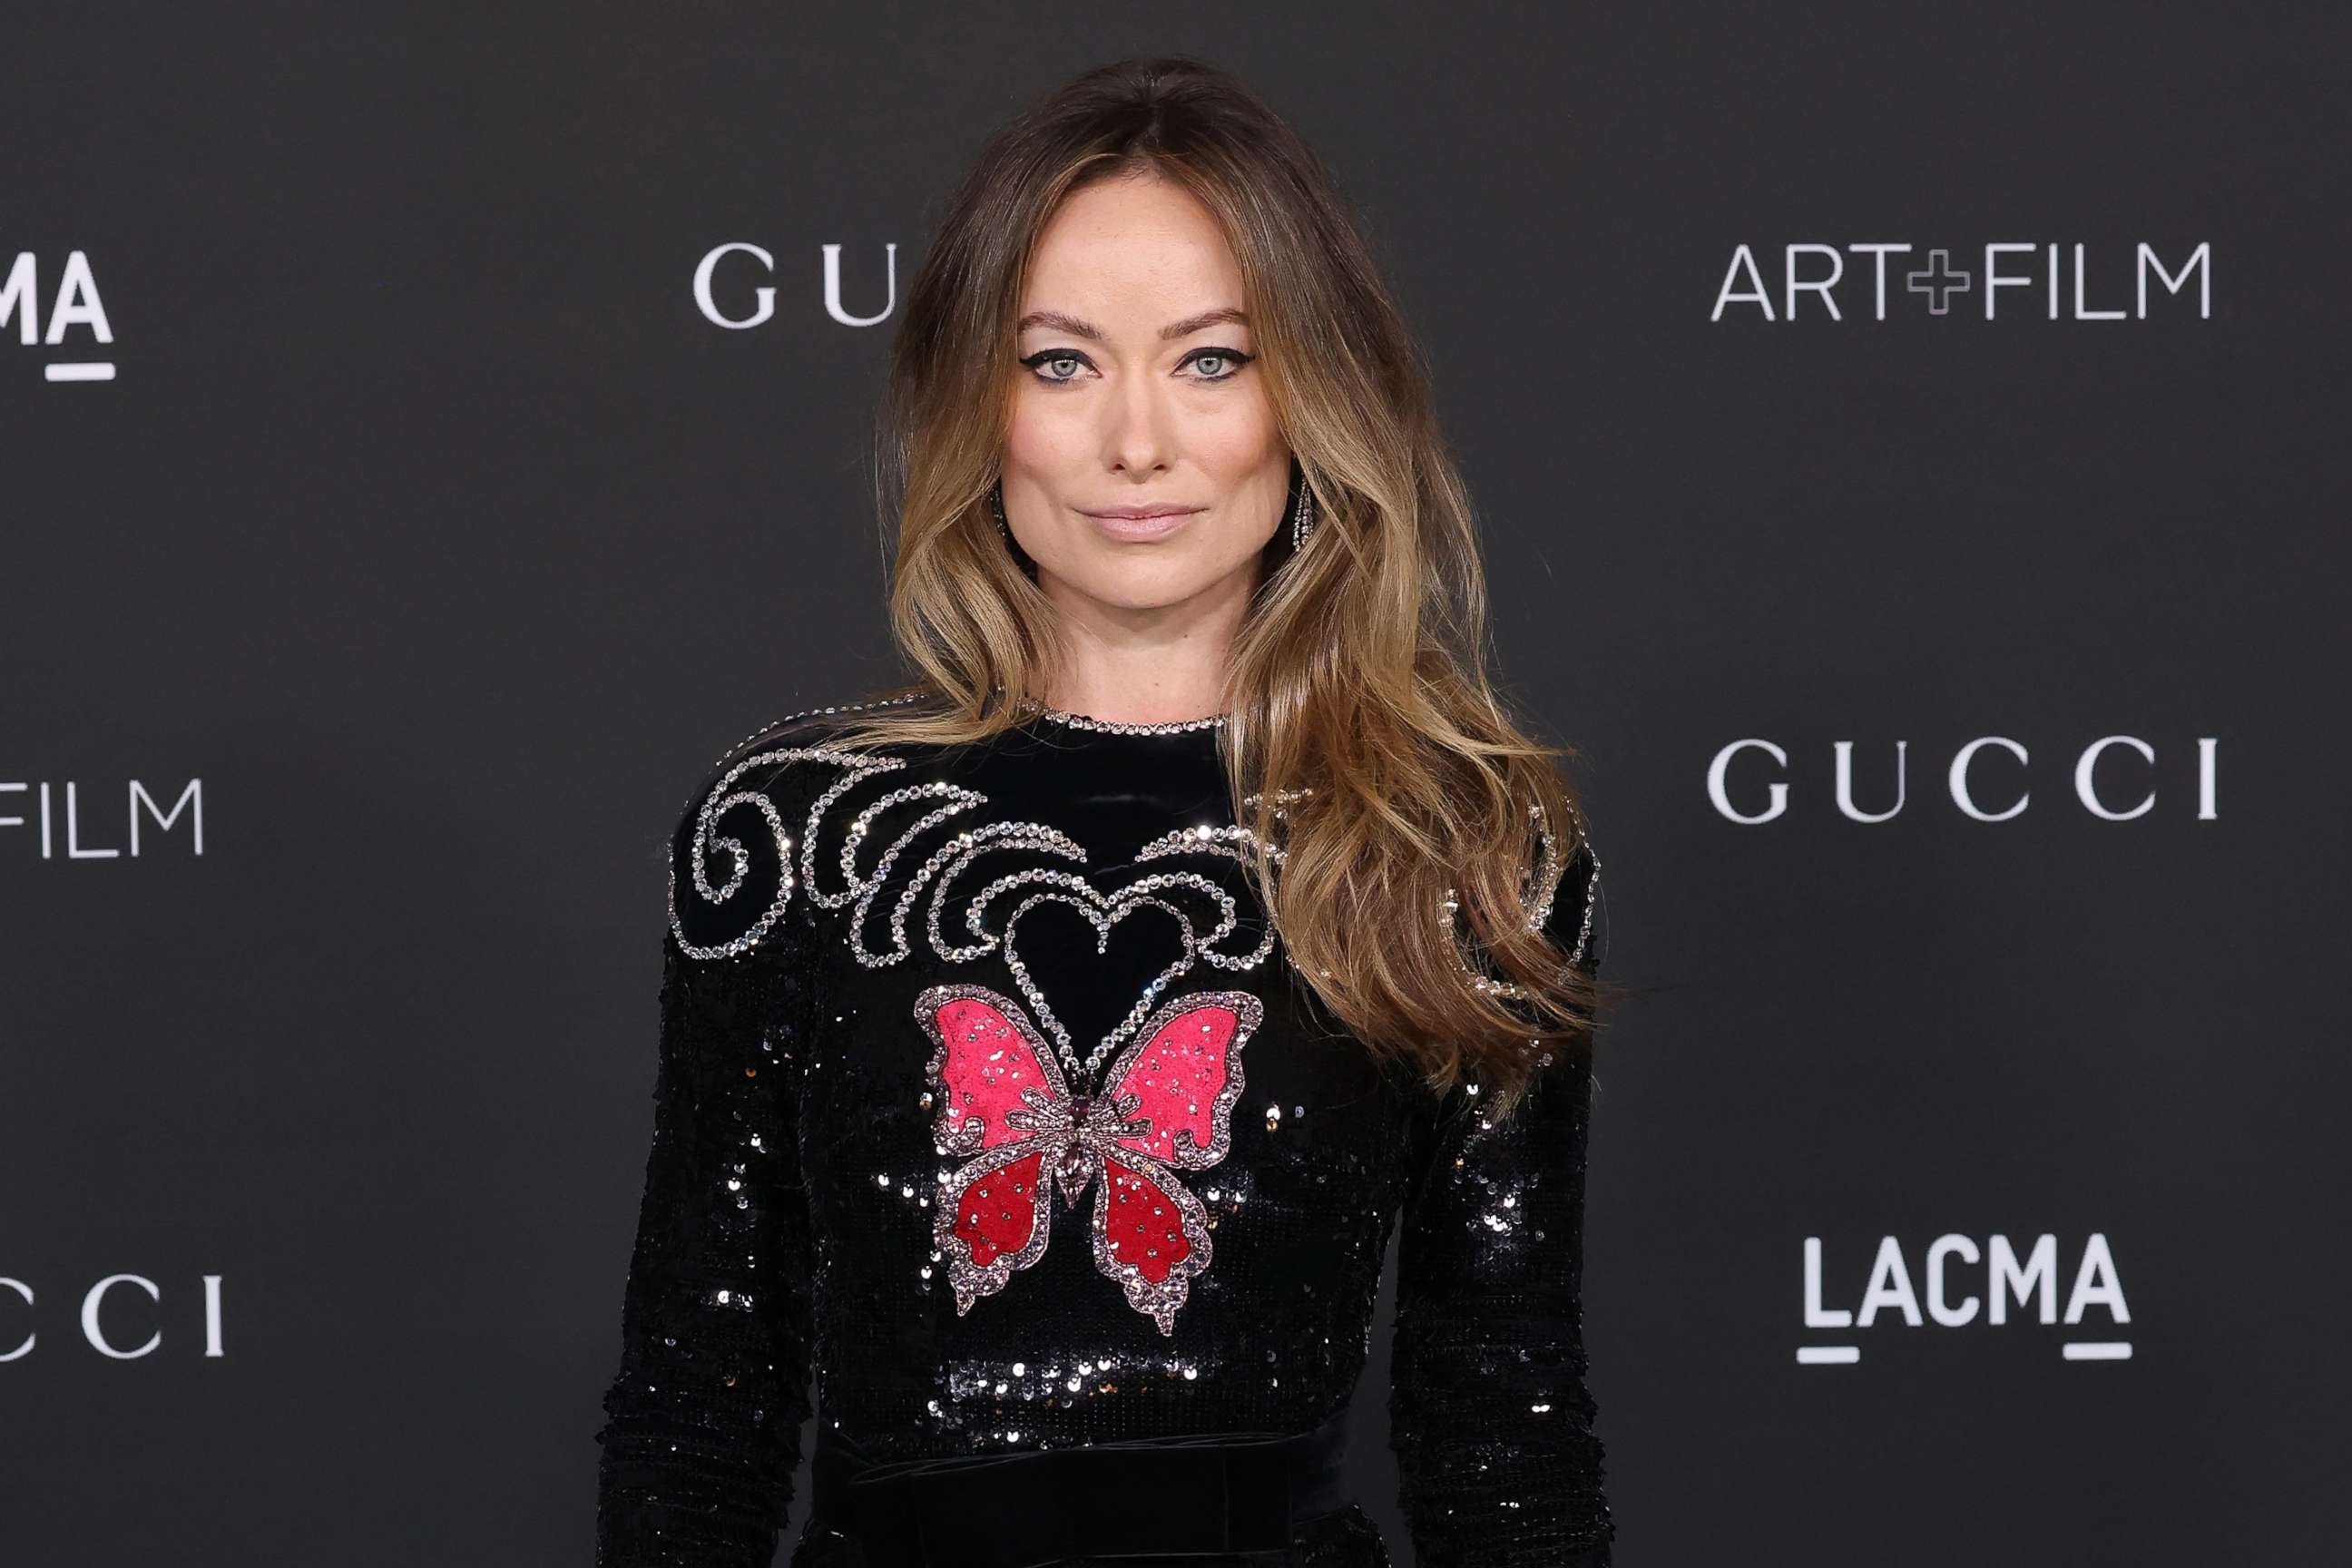 PHOTO: Olivia Wilde at Los Angeles County Museum of Art on Nov. 6, 2021 in Los Angeles.